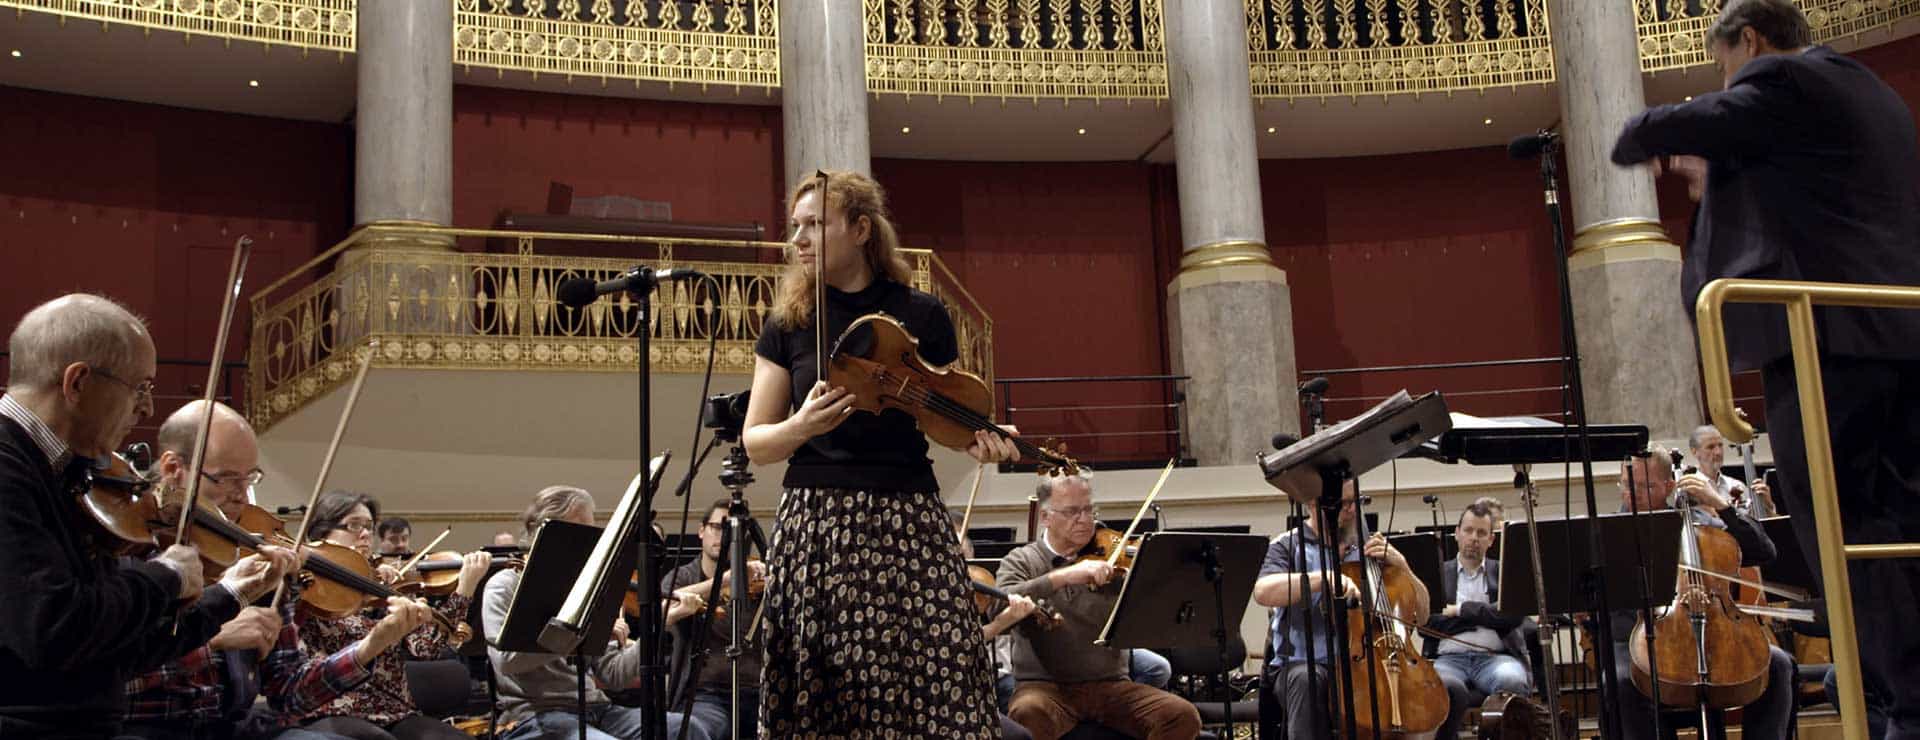 Wired for Music - Inside the Wiener Symphoniker